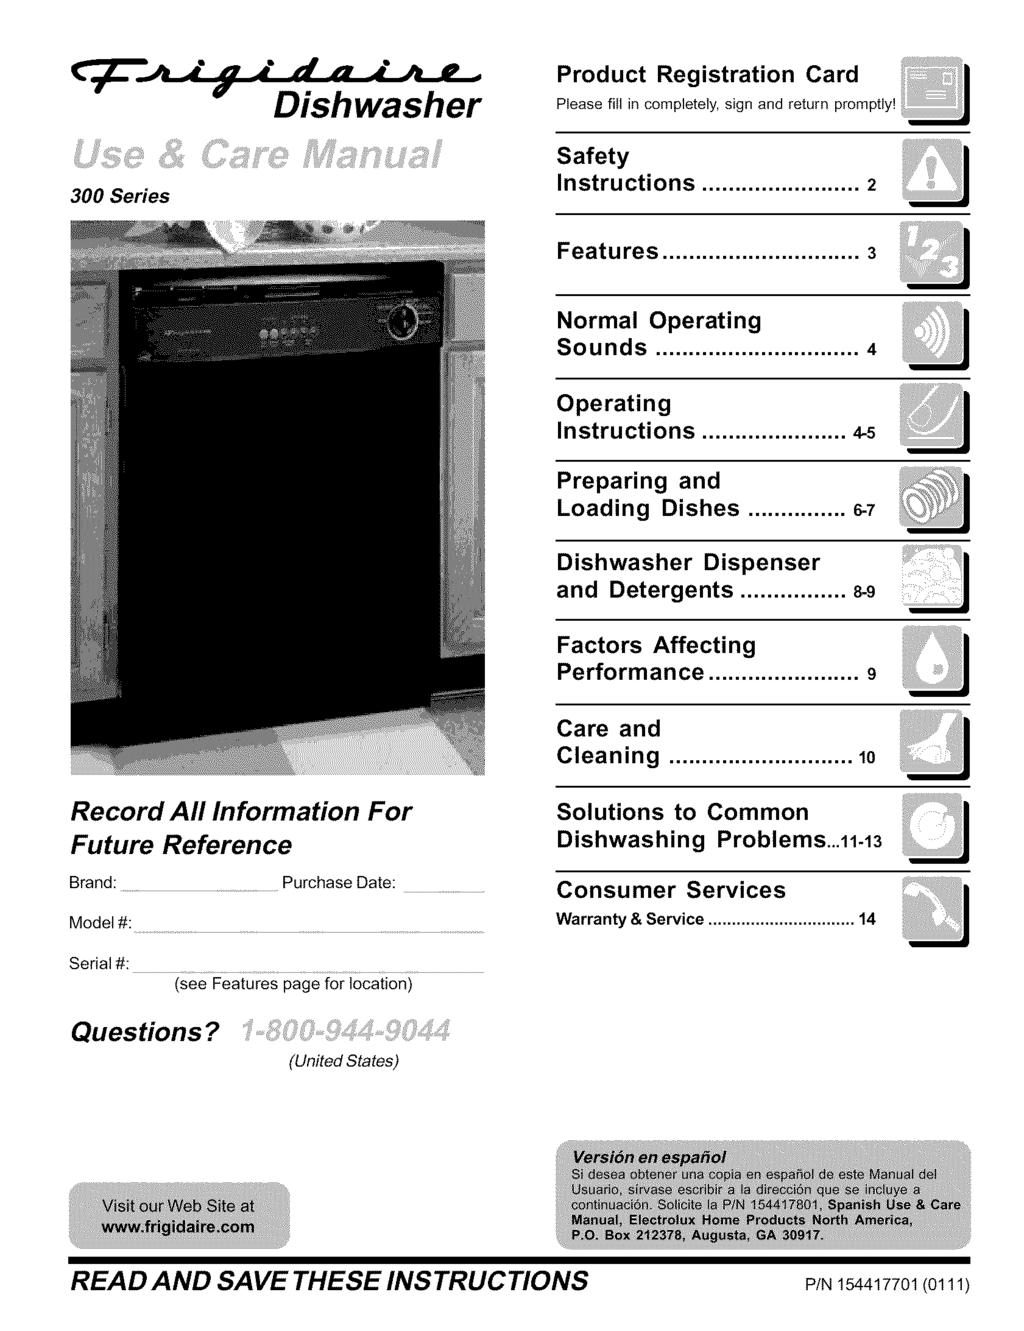 Dishwasher 300 Series Safety Instructions... 2 Features... 3 Normal Operating Sounds... 4 Operating Instructions... 4-5 Preparing and Loading Dishes... 6-7 Dishwasher and Detergents Dispenser.